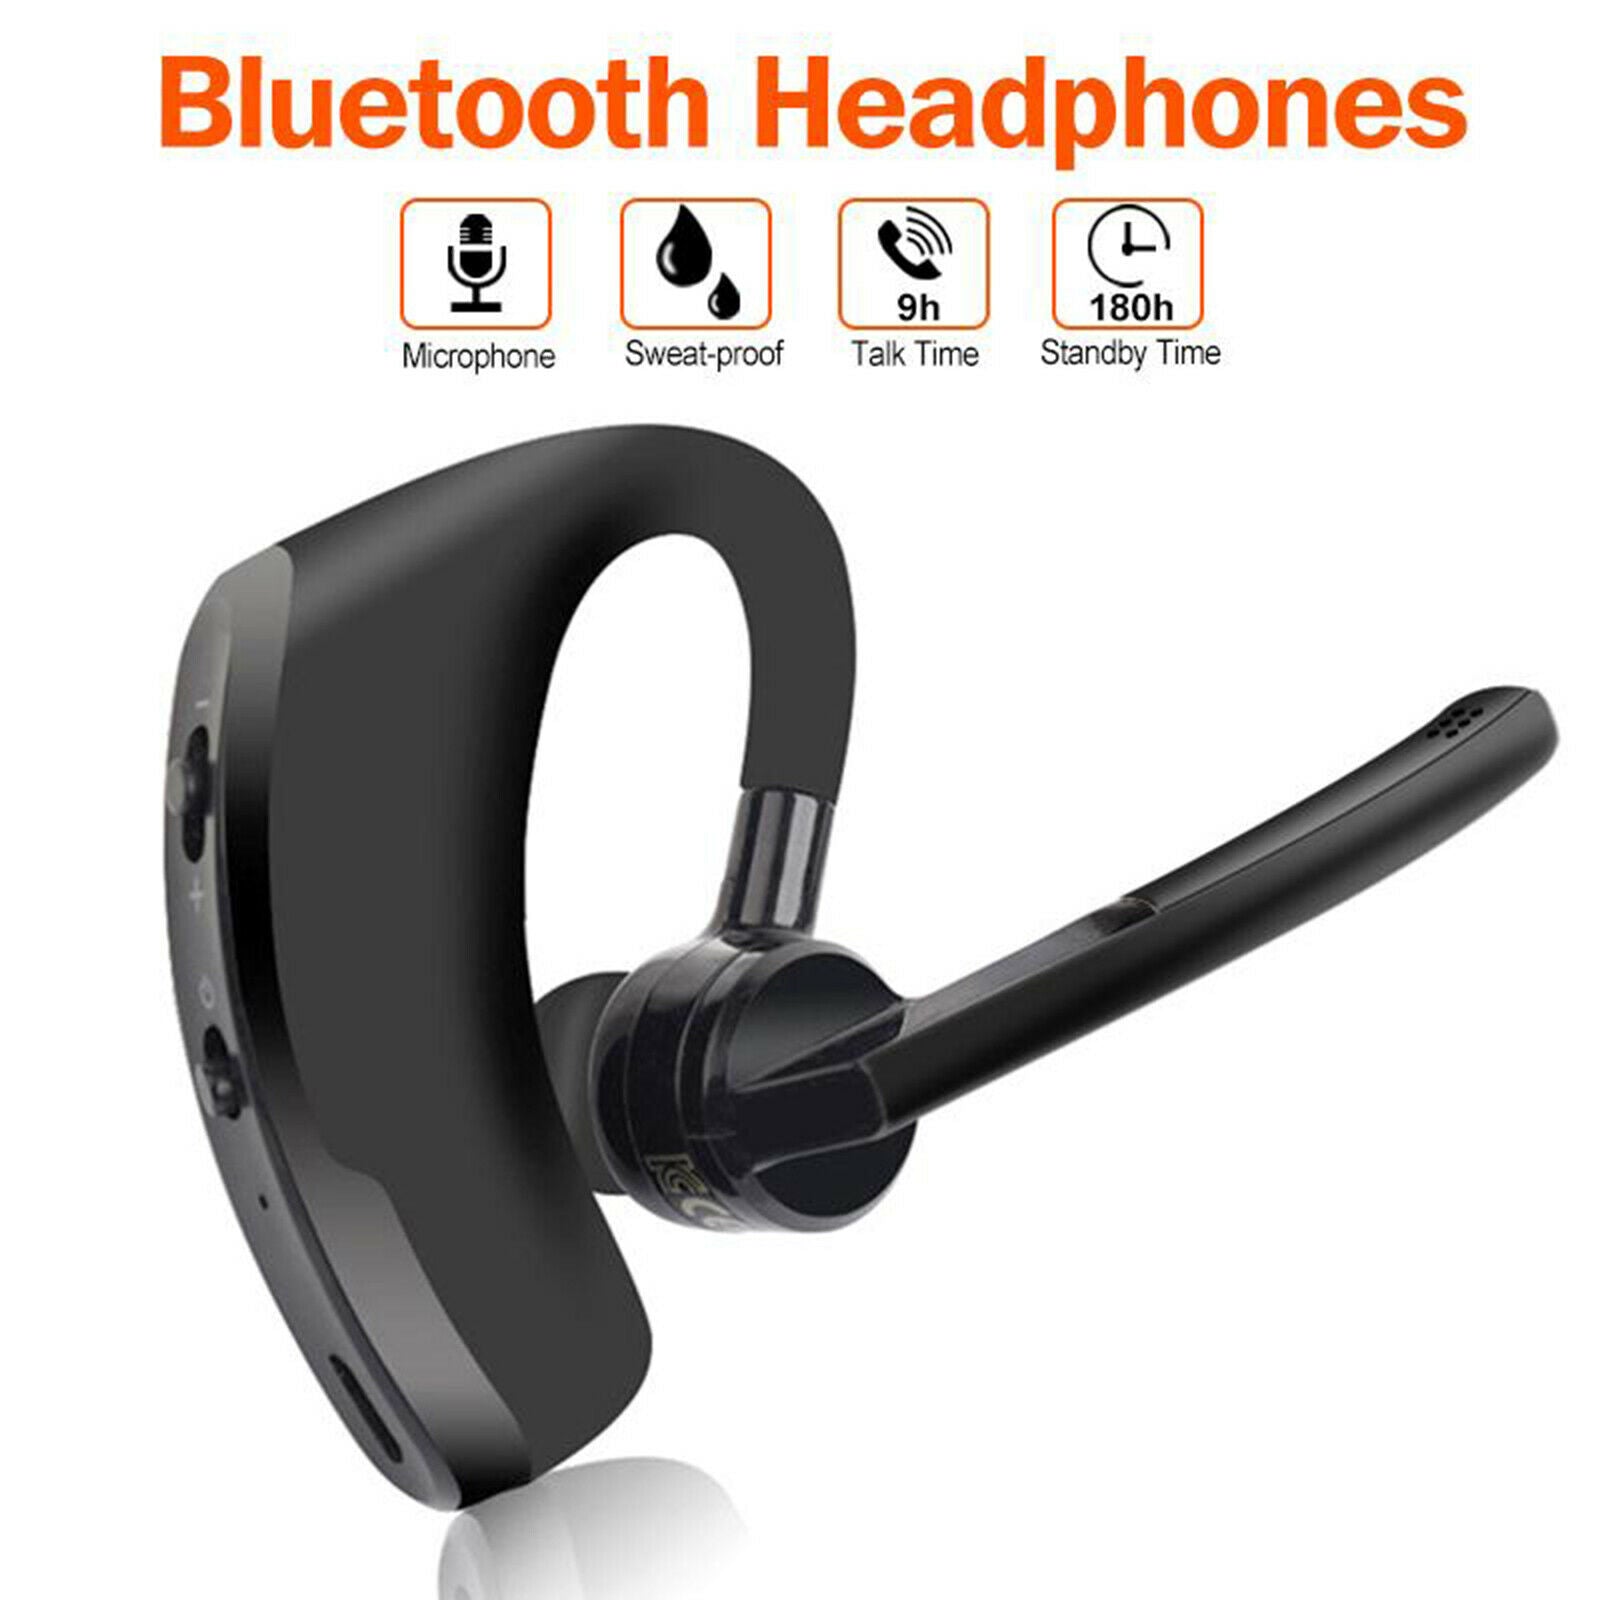 Handsfree Bluetooth Headset V4.0 9 Hrs HD Talktime for Cell Phone Laptop PC